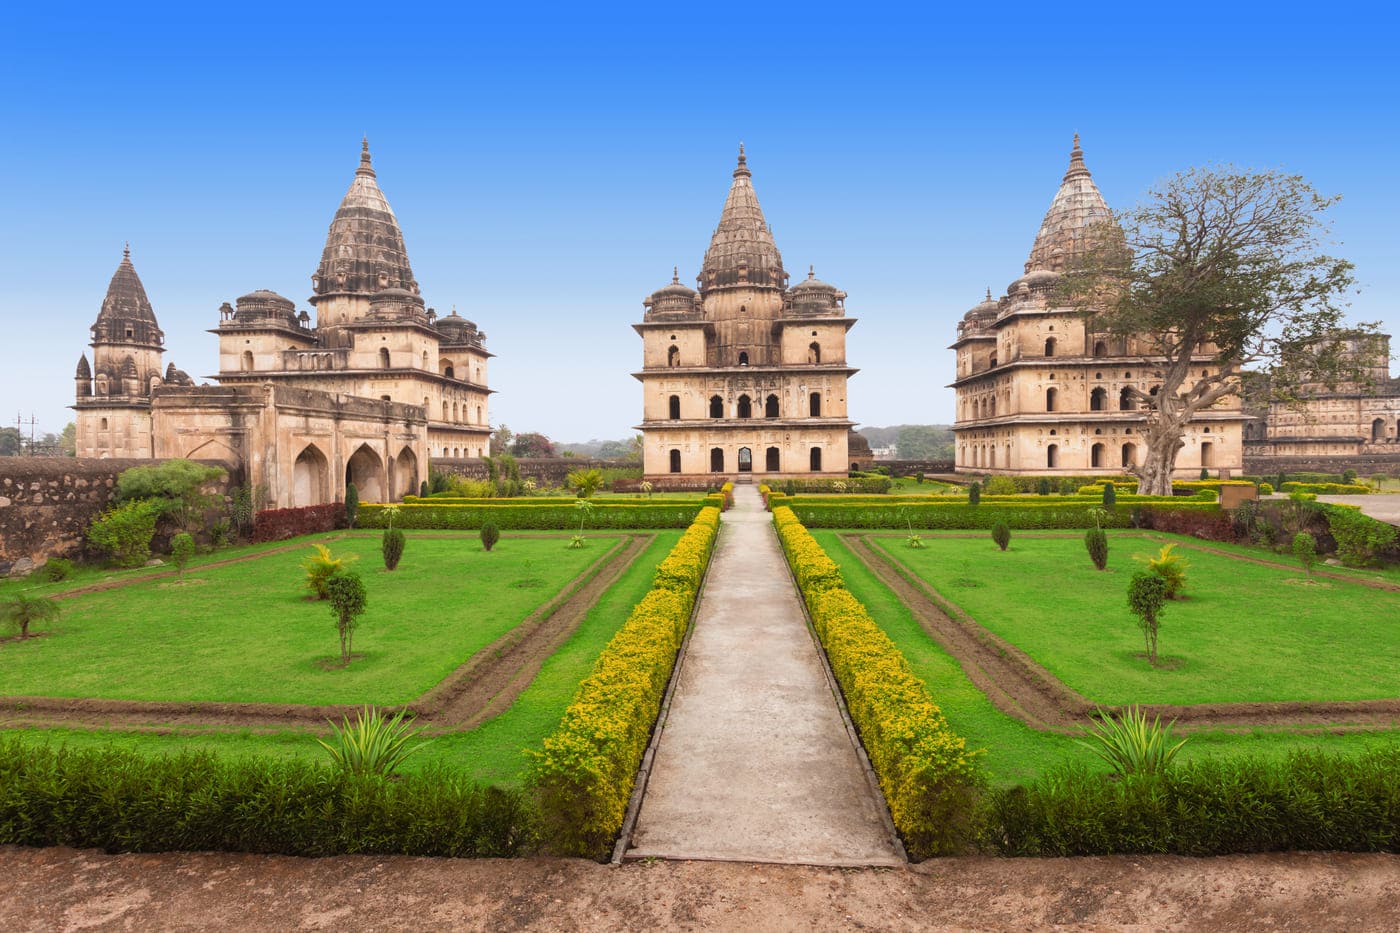 A wide shot of the regal temple complex at the Orchha city with its many dome-shaped roofs dating back the seventeenth century 